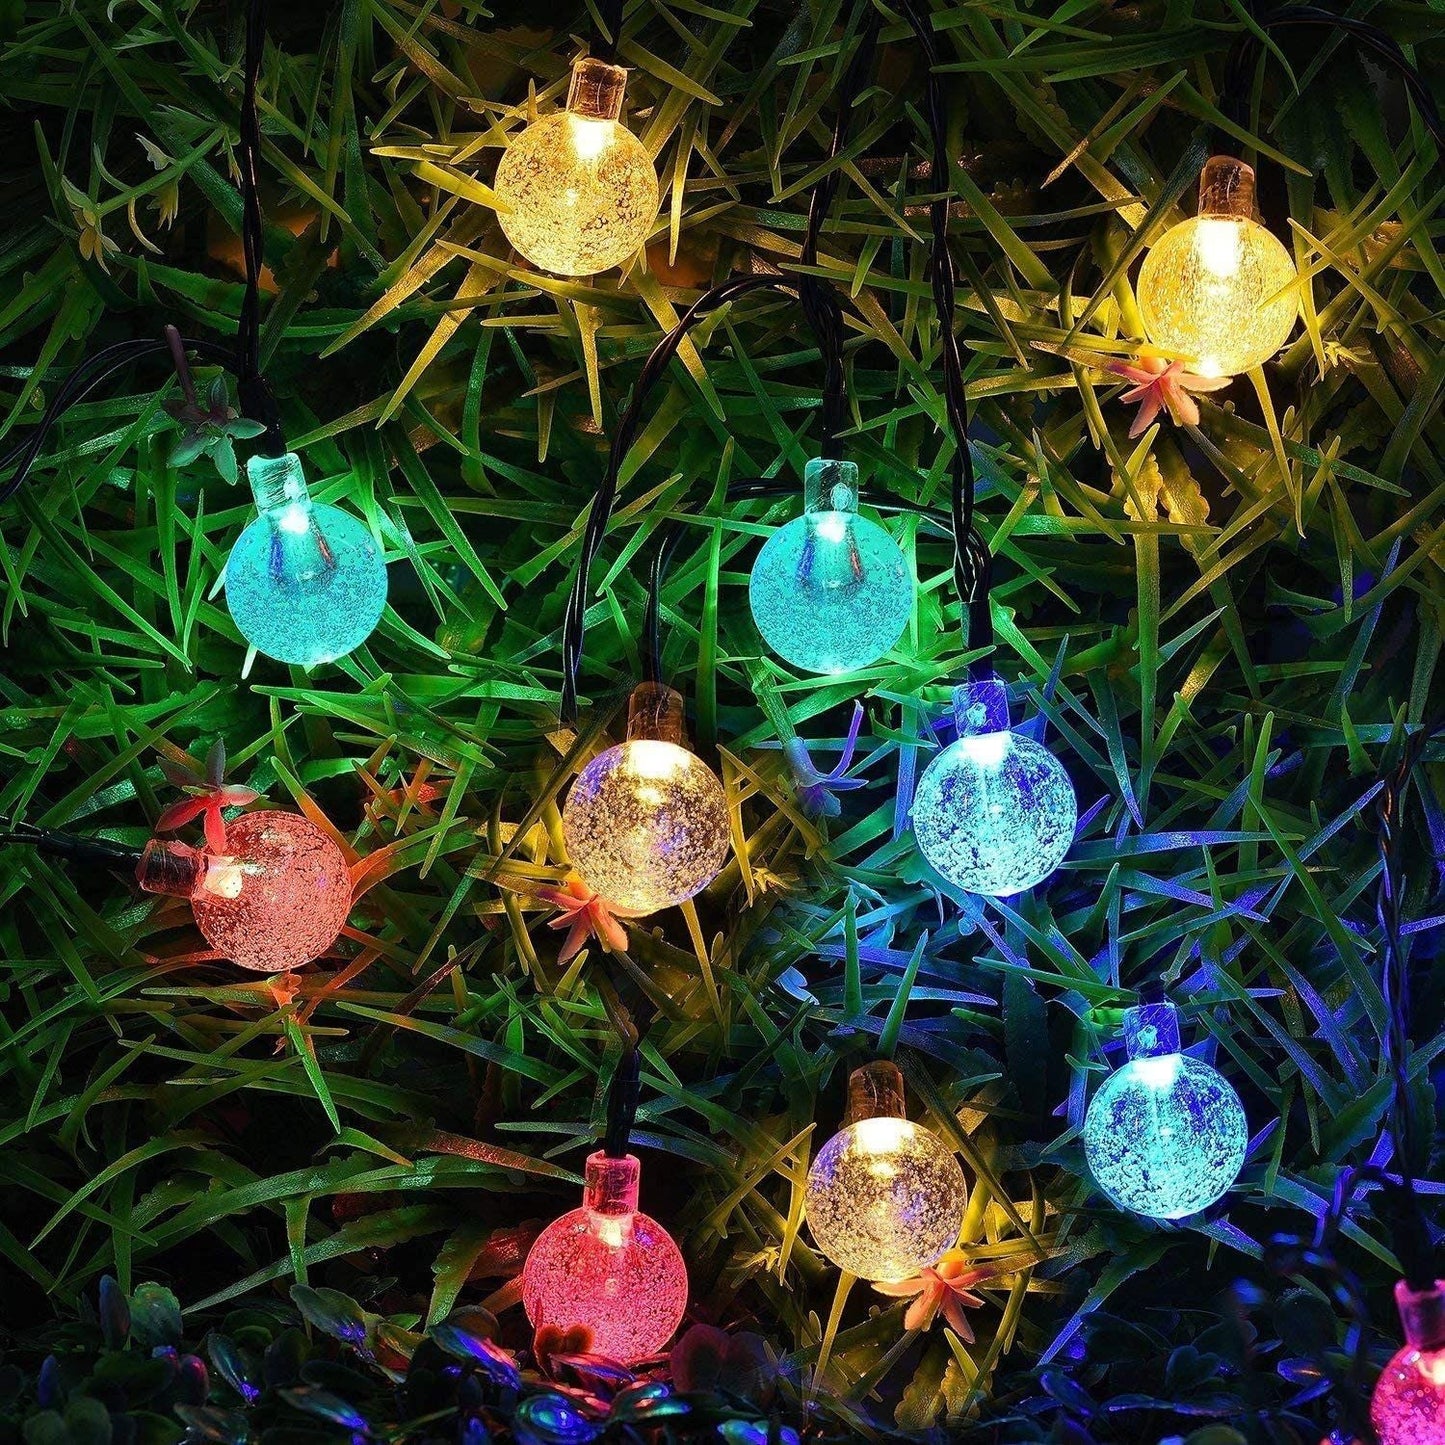 14 LED Crystal Bubble Ball String Fairy Lights For Decoration (Multicolor) Roposo Clout